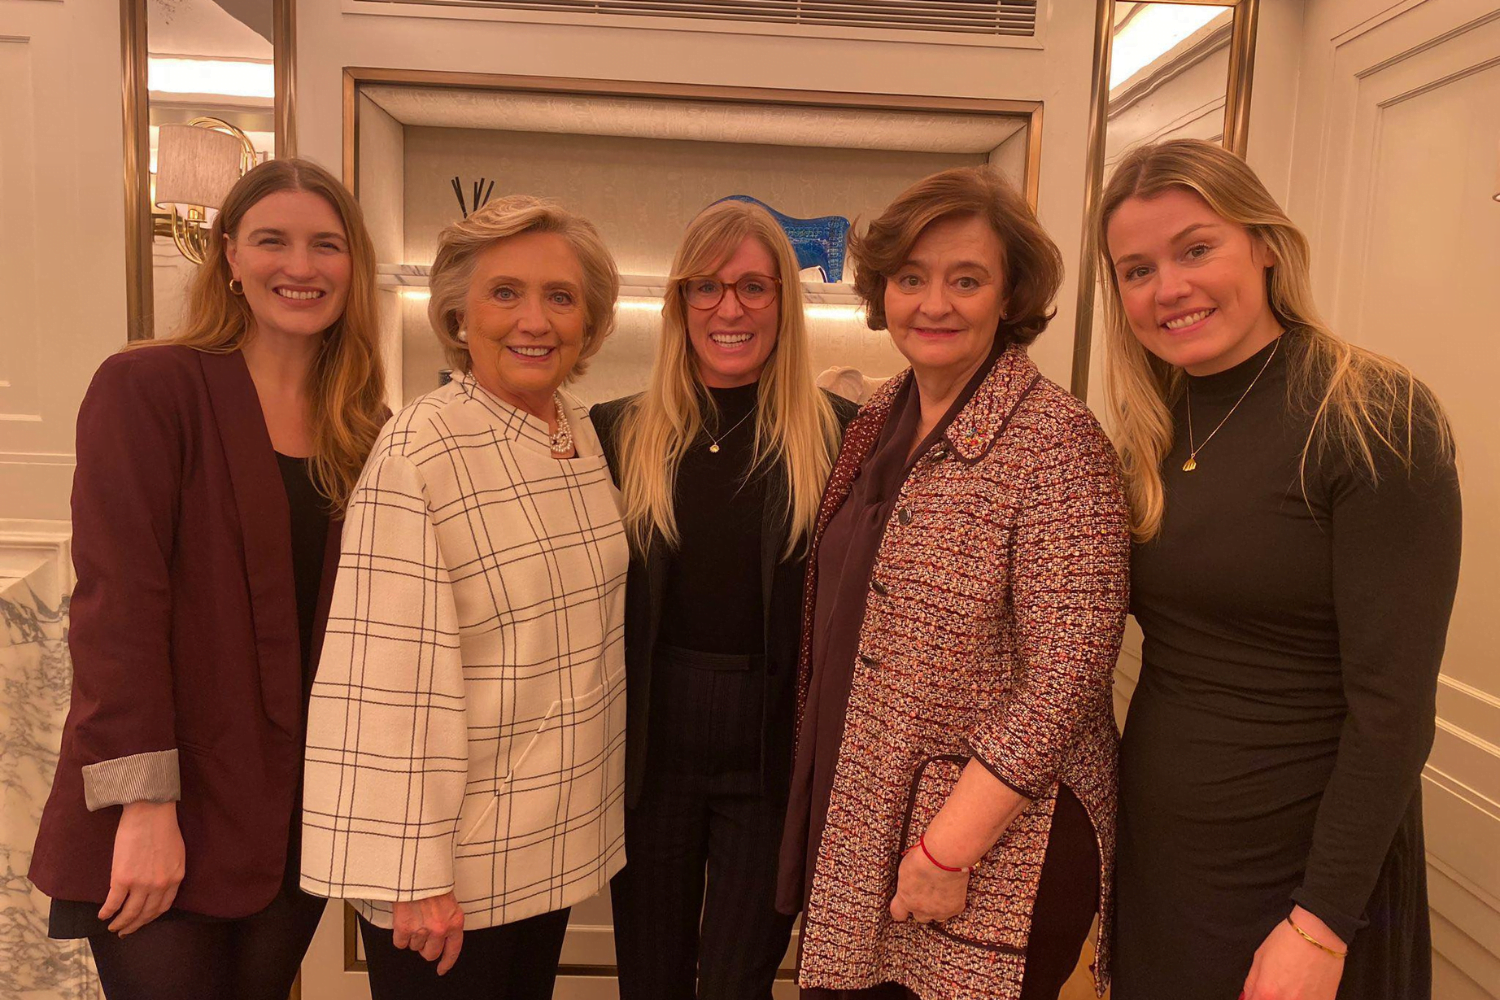 The Cherie Blair Foundation for Women's team stands in a line with Hillary Clinton, Cherie Blair CBE KC, and Anna Stoecklein, host of The Story of Woman podcast.